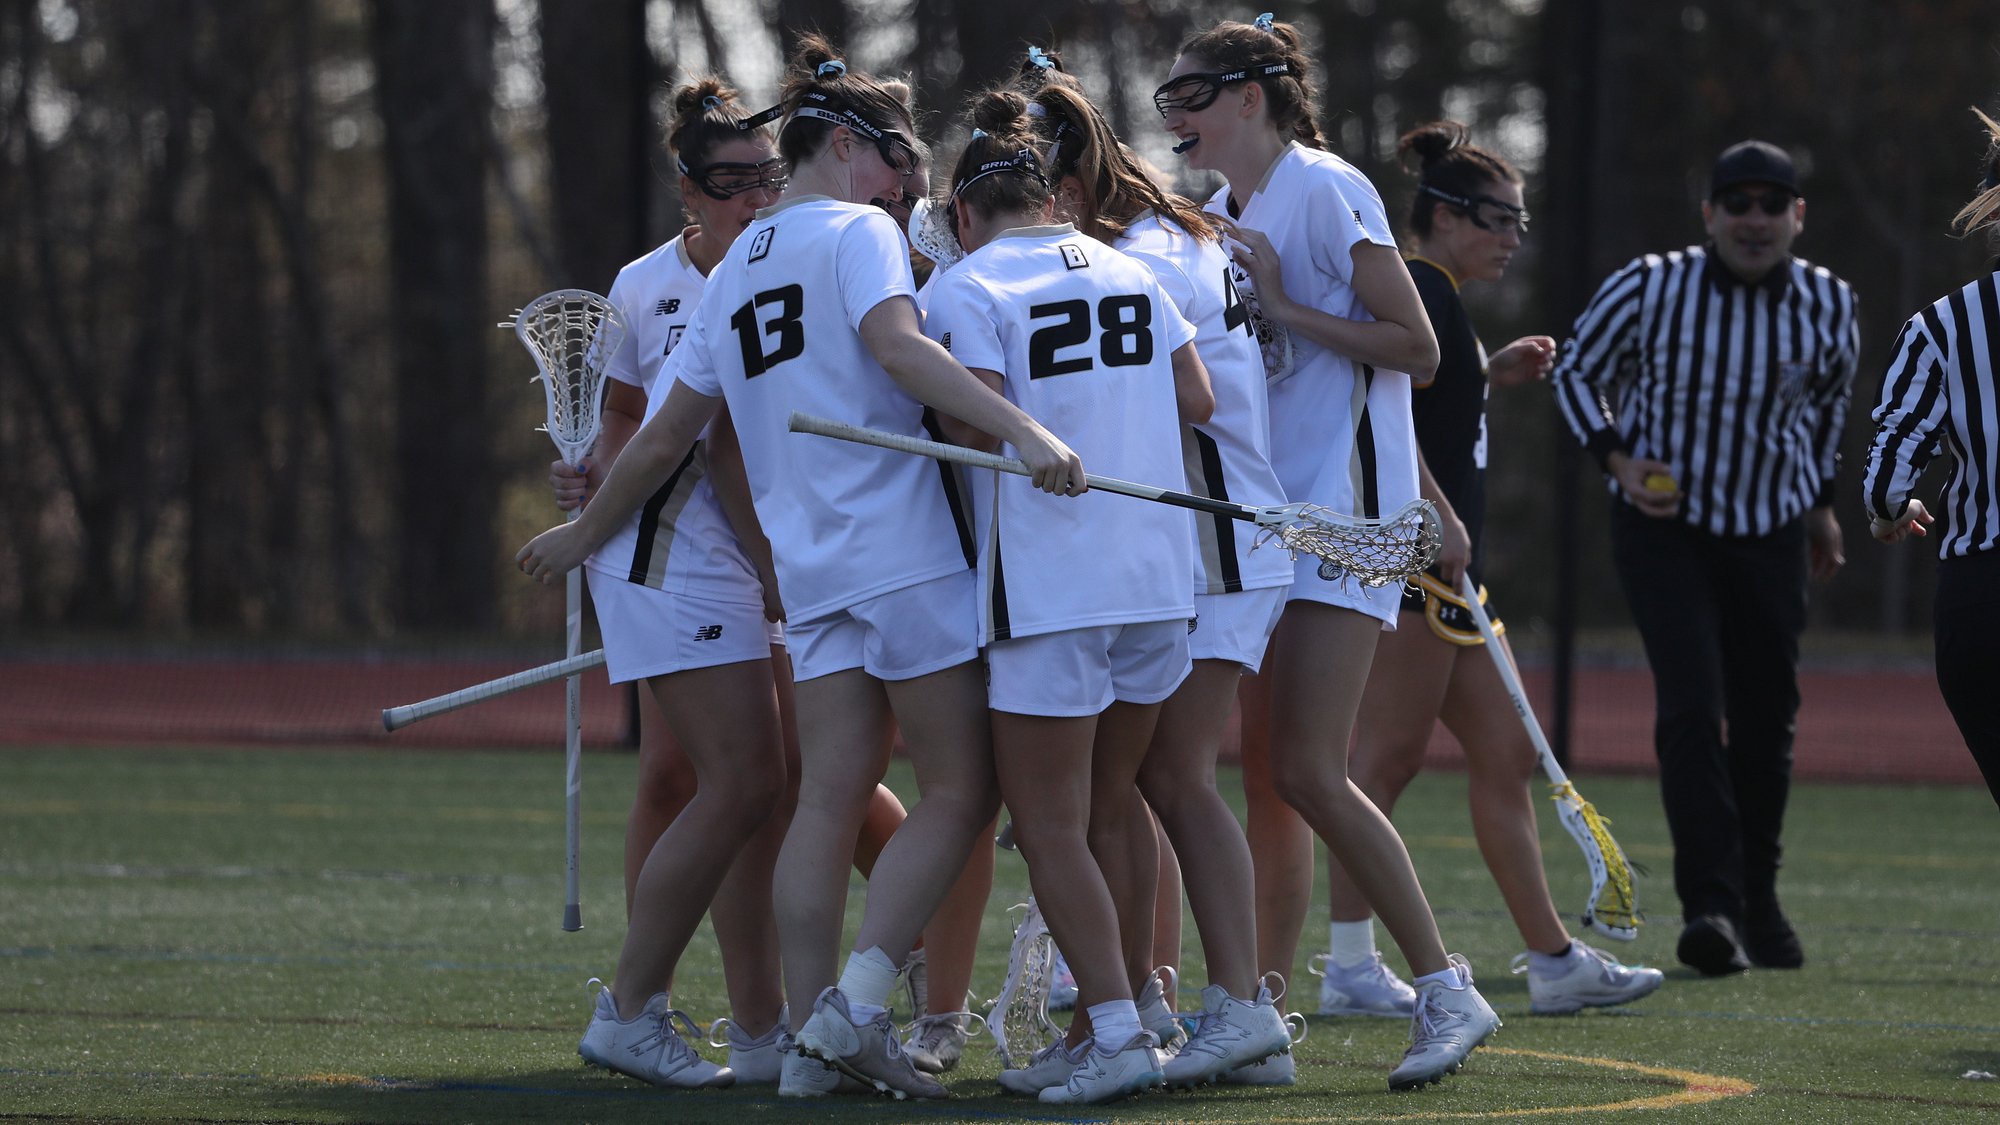 Dawgs rise above Skyhawks, 16-10, to end non-conference slate